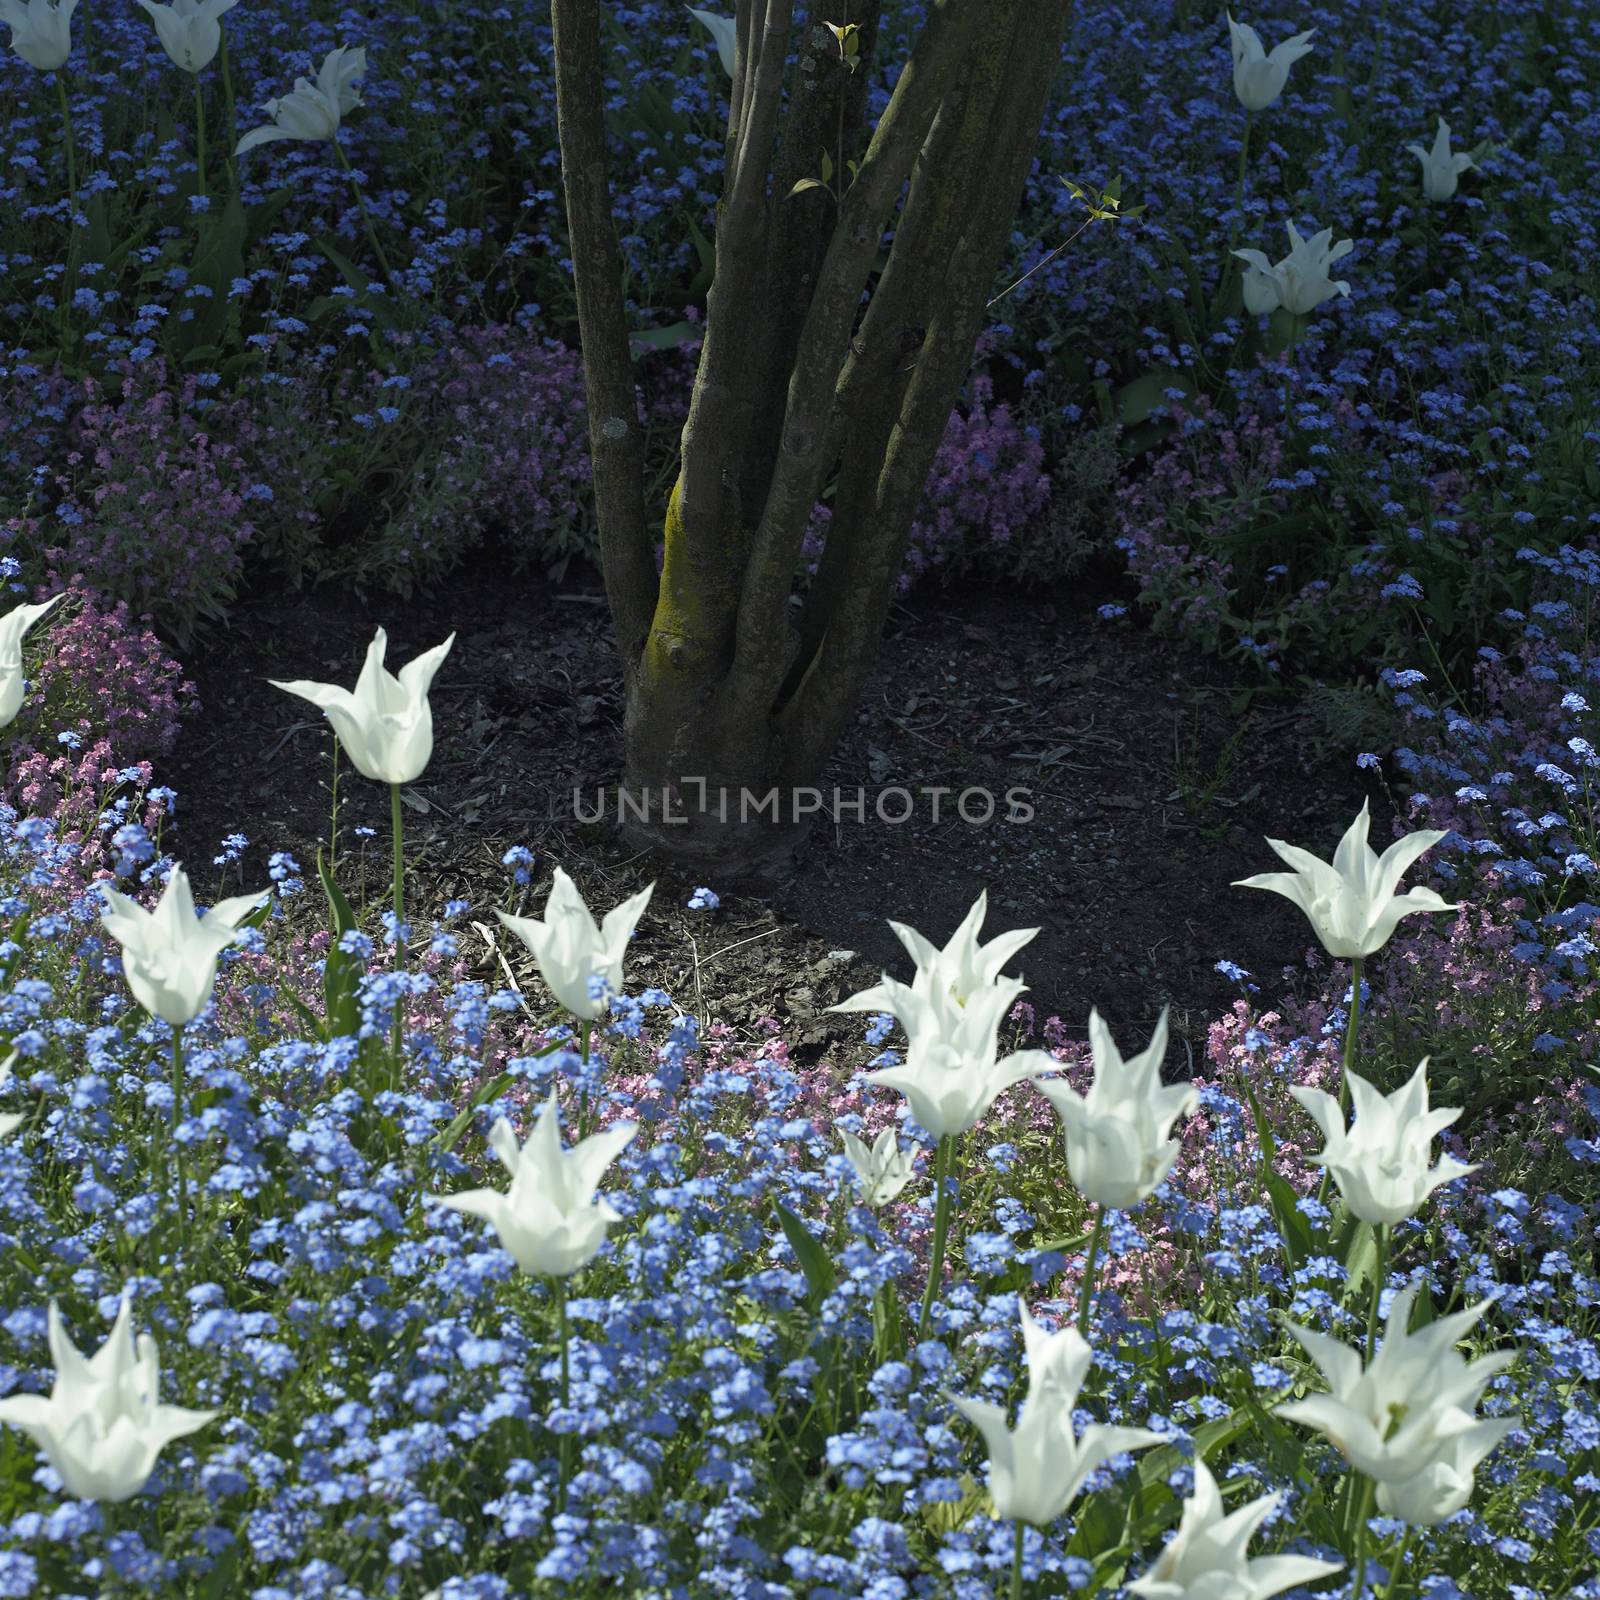 White tulips wide open sprouting up between tiny blue flowers surrounding a small tree